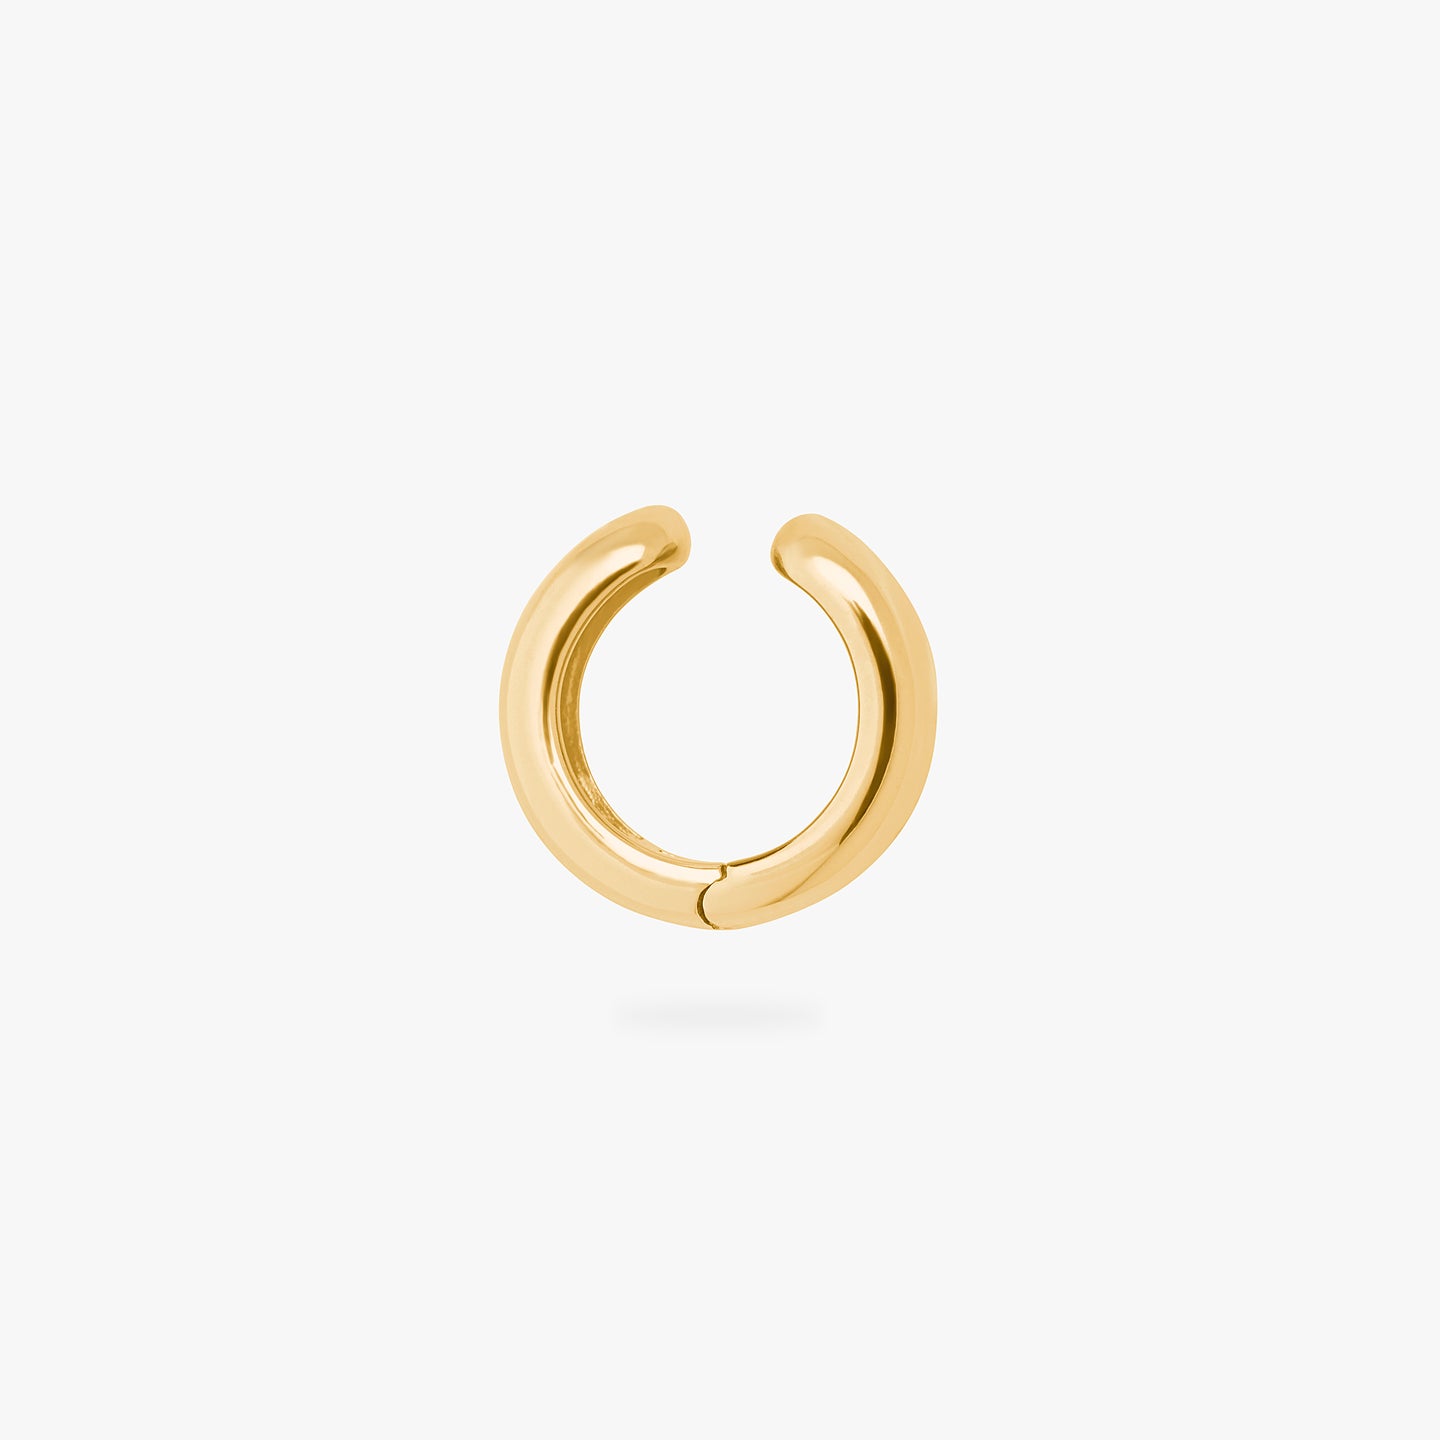 This is a gold, chunky shaped ear cuff. color:null|gold